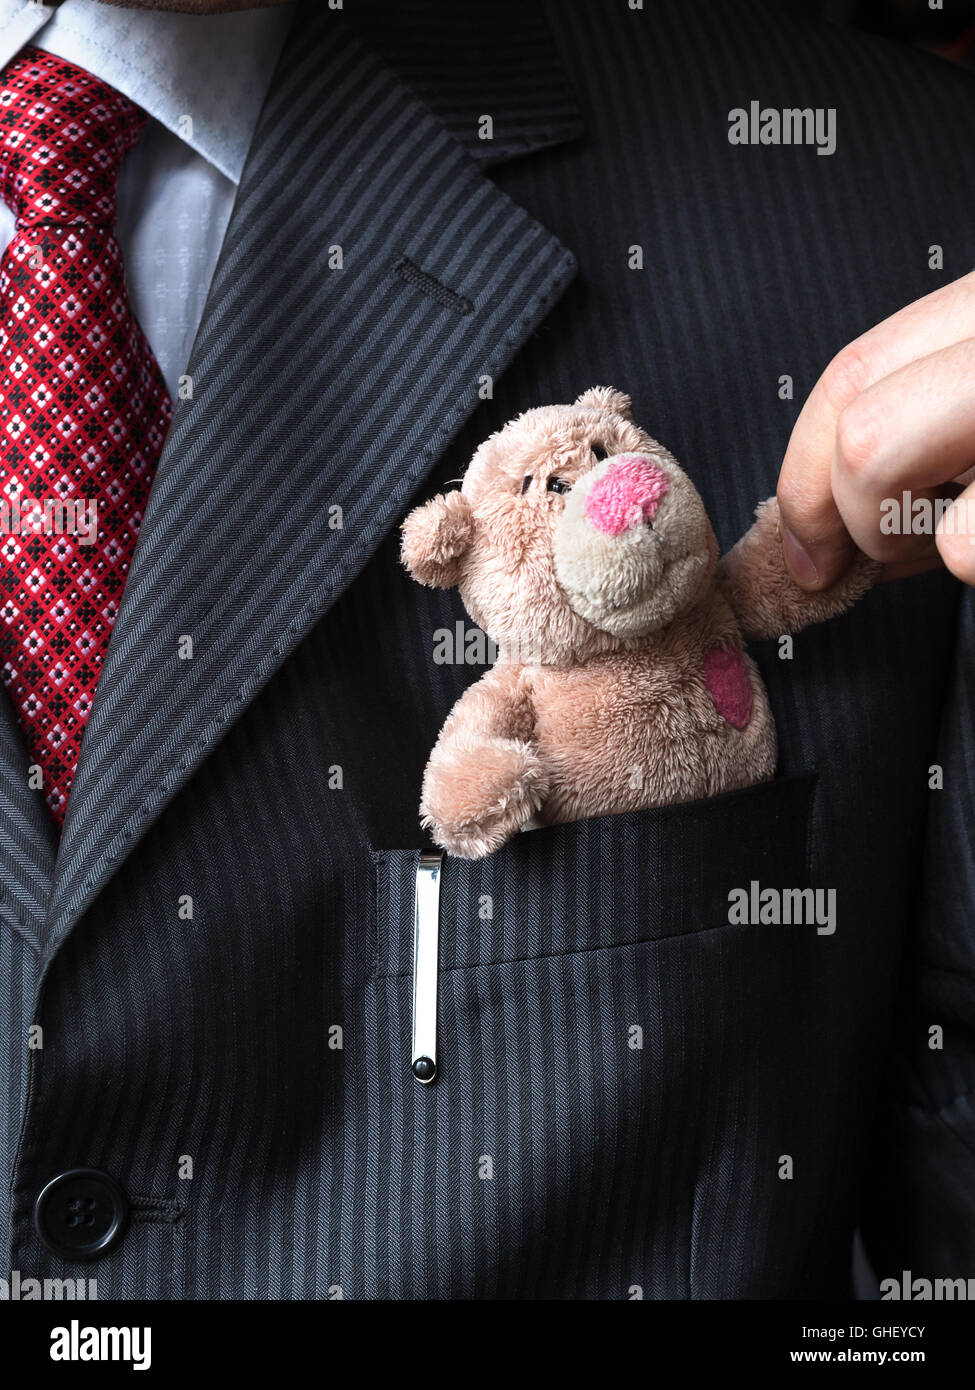 The elegant stylish businessman keeping cute teddy bear in a his breast suit pocket. Formal negotiations concept. Stock Photo